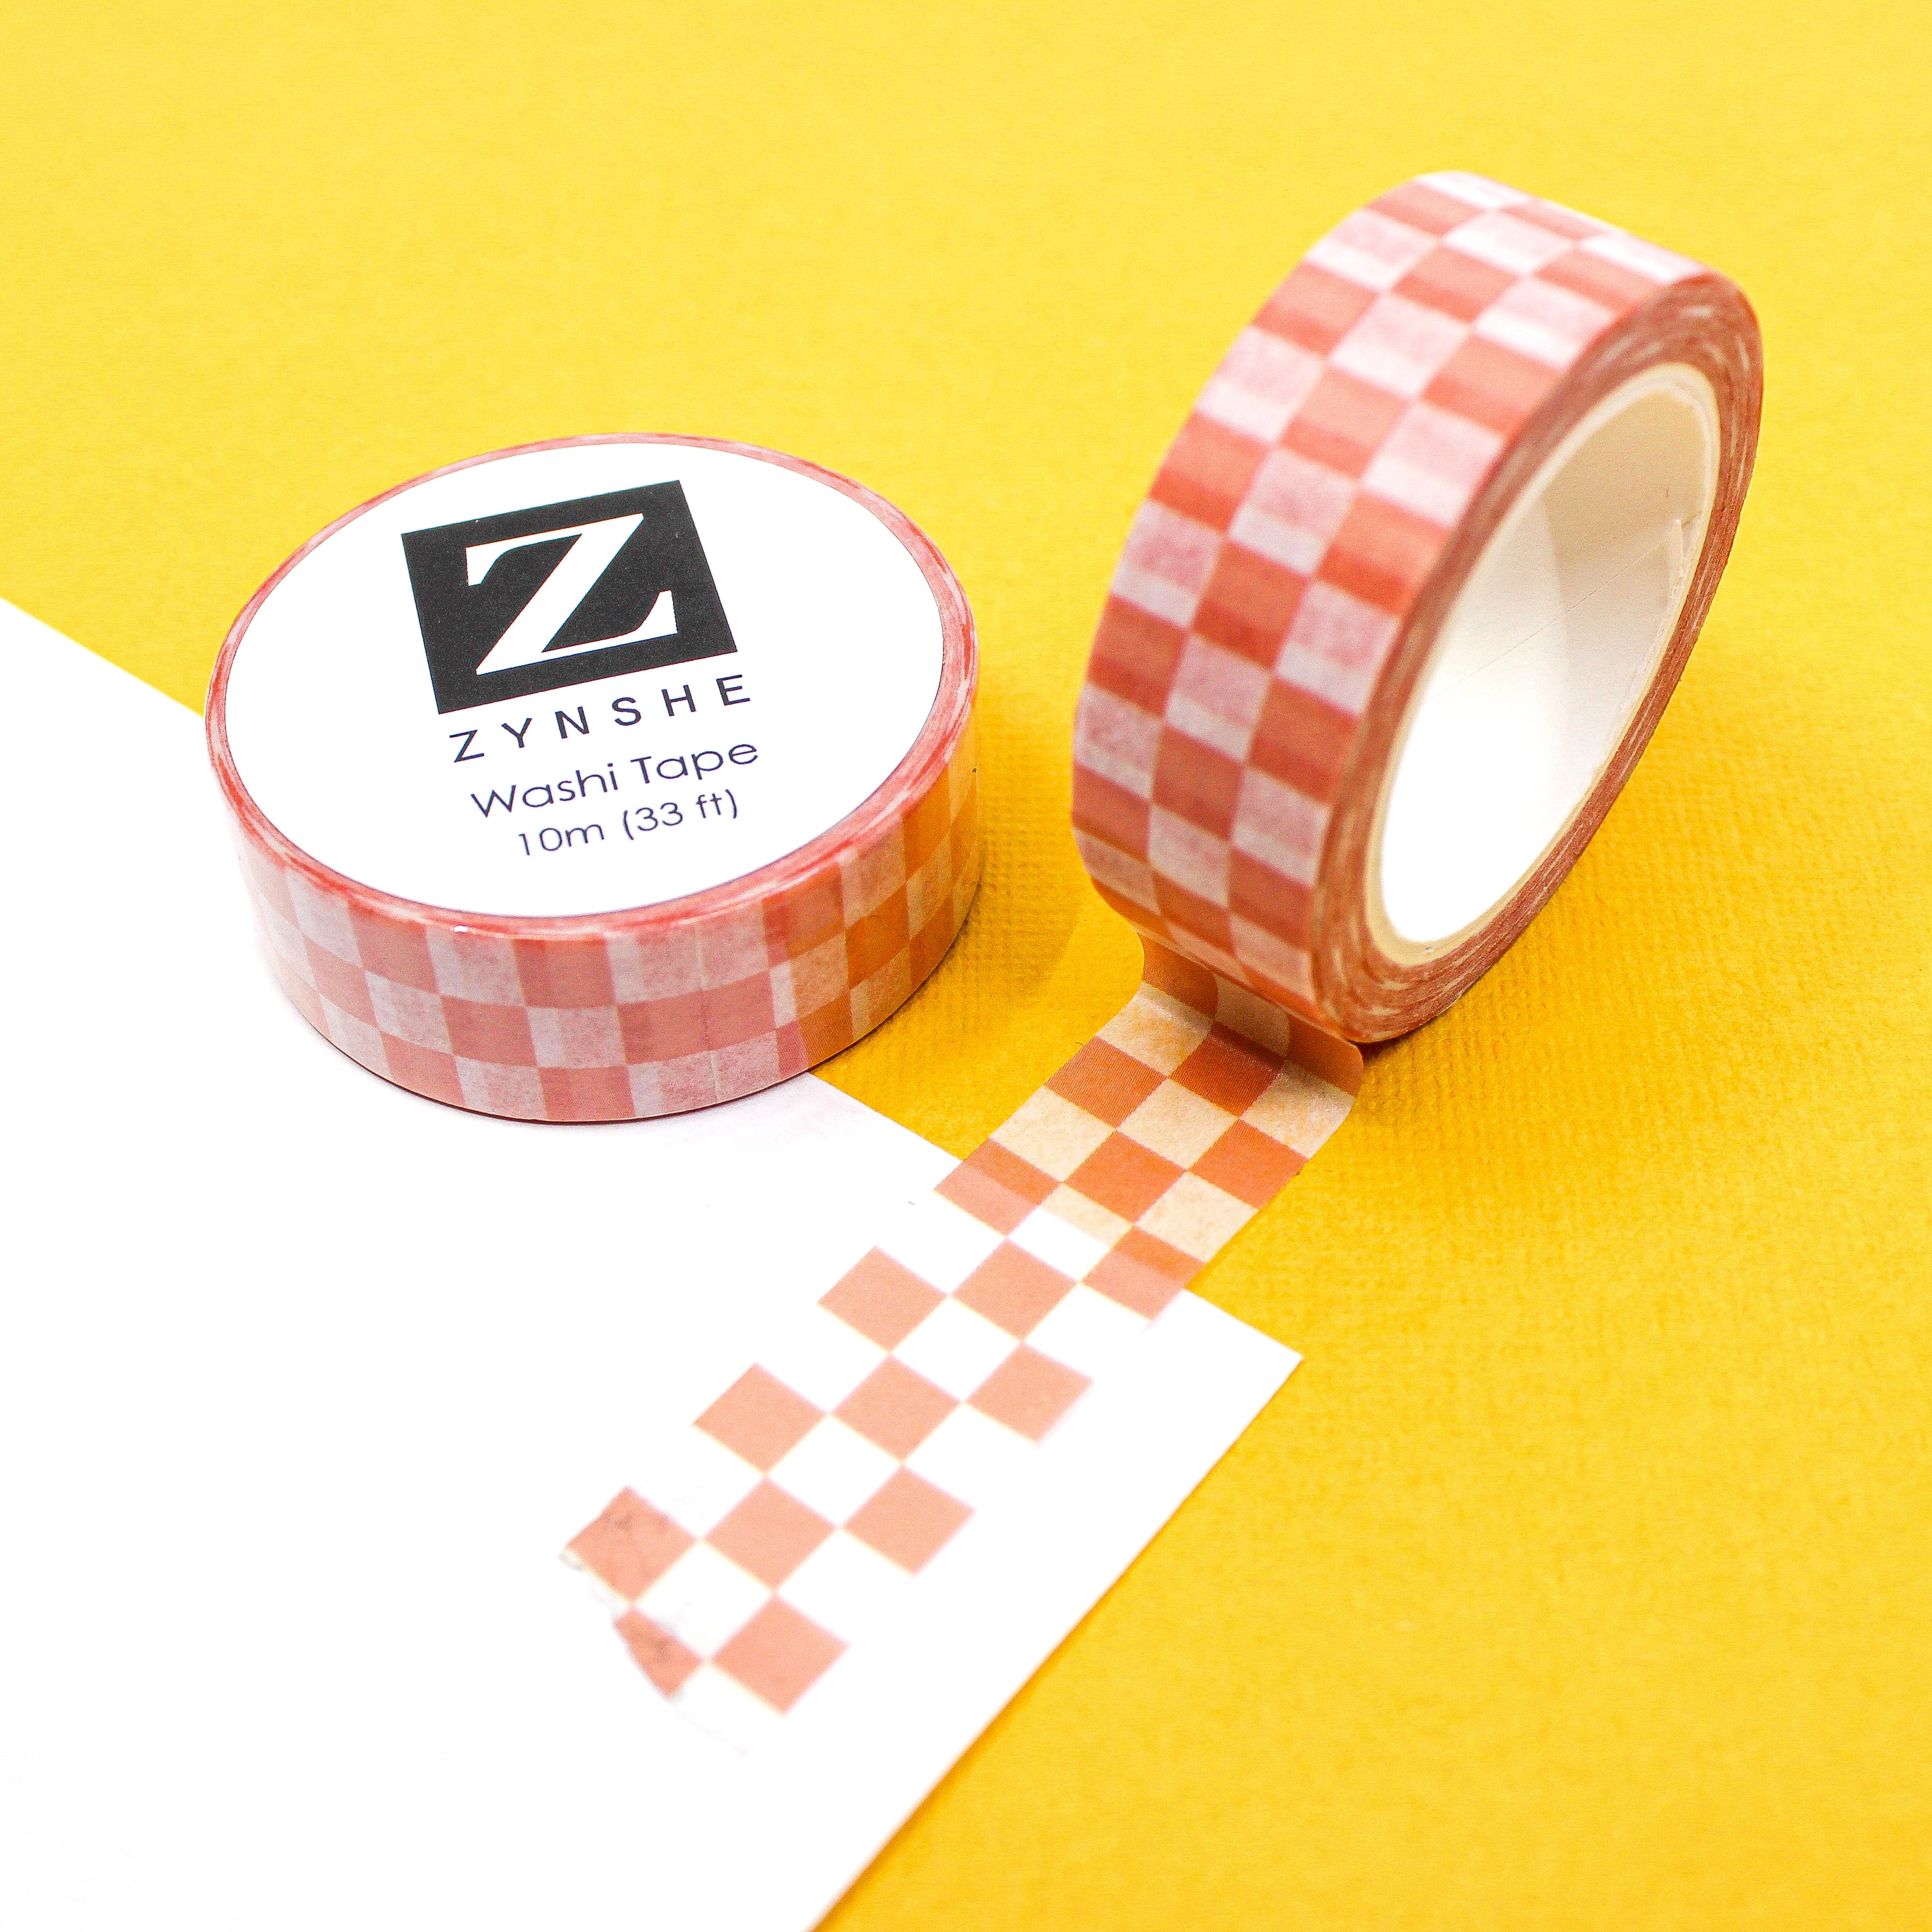 This is a pink checkerboard view themed washi tape designed by Zynshe from BBB Supplies Craft Shop